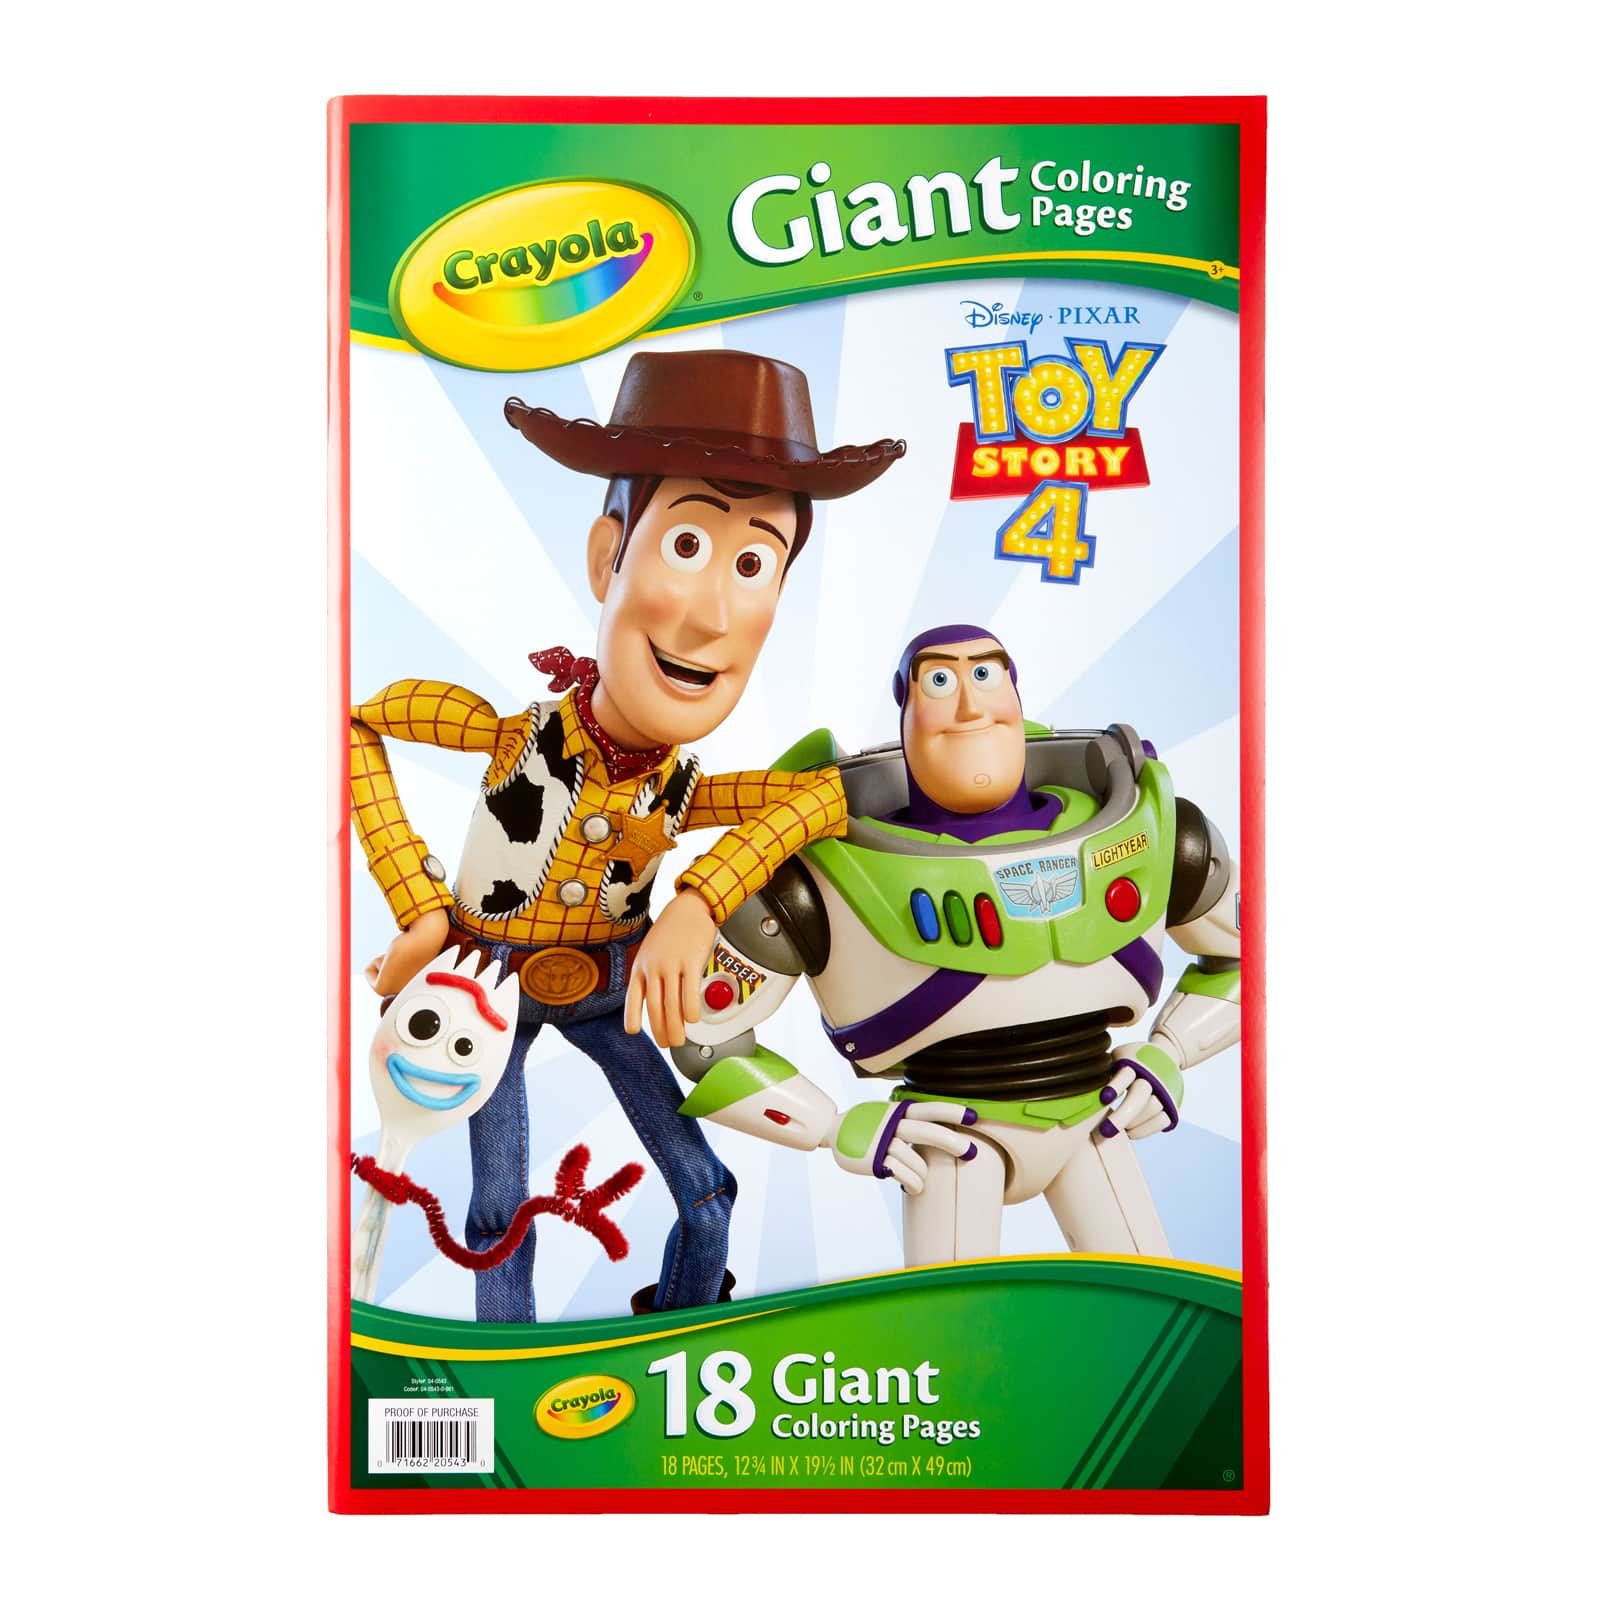 Crayola Disney Pixar Toy Story 4 Giant Coloring Pages